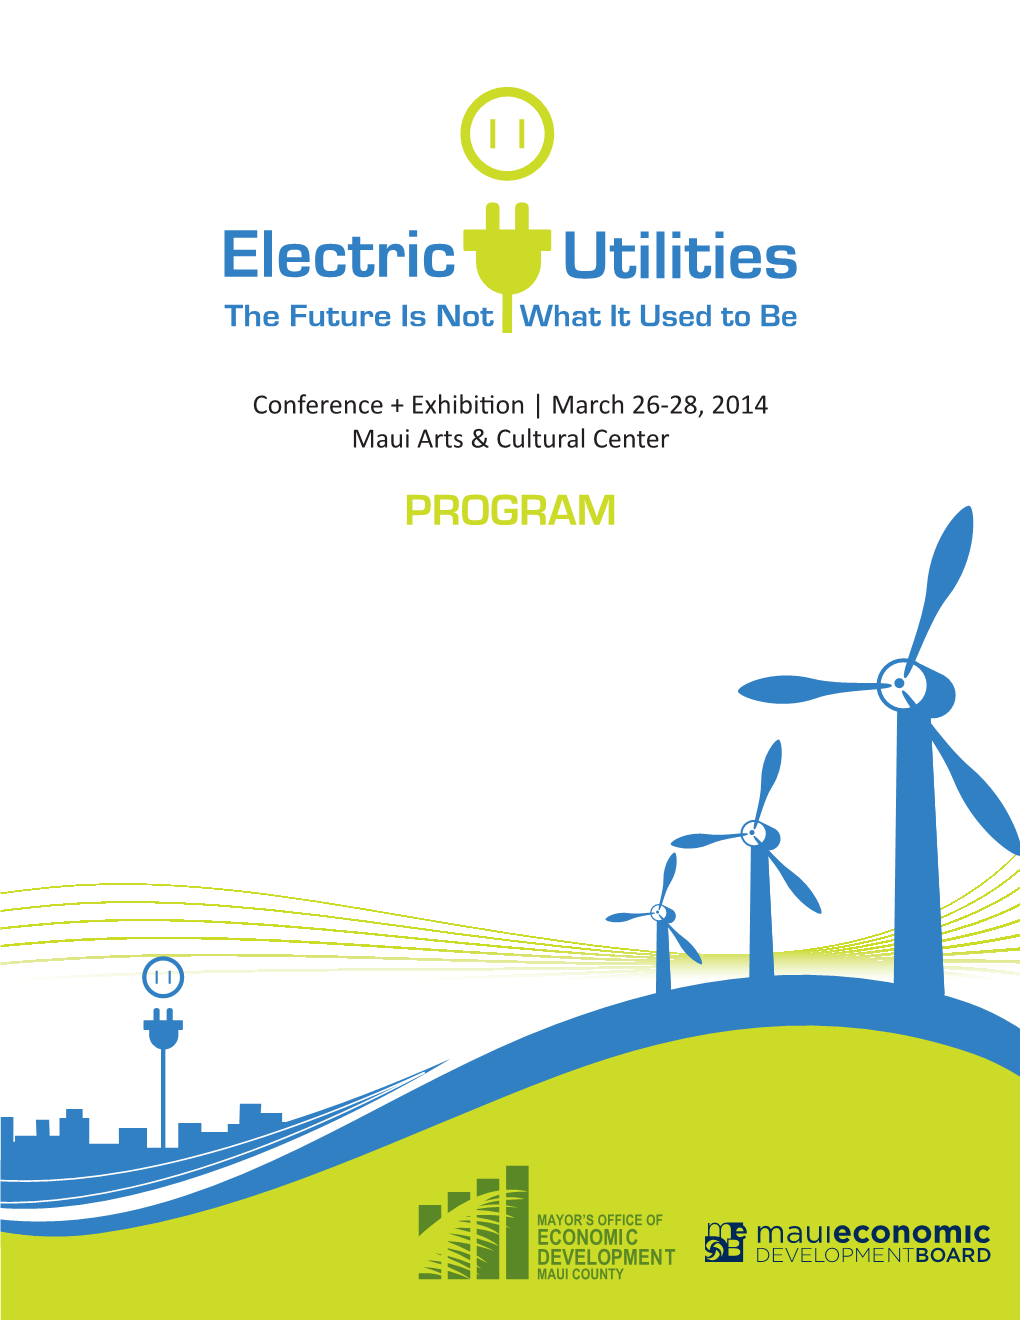 Electric Utilities the Future Is Not What It Used to Be